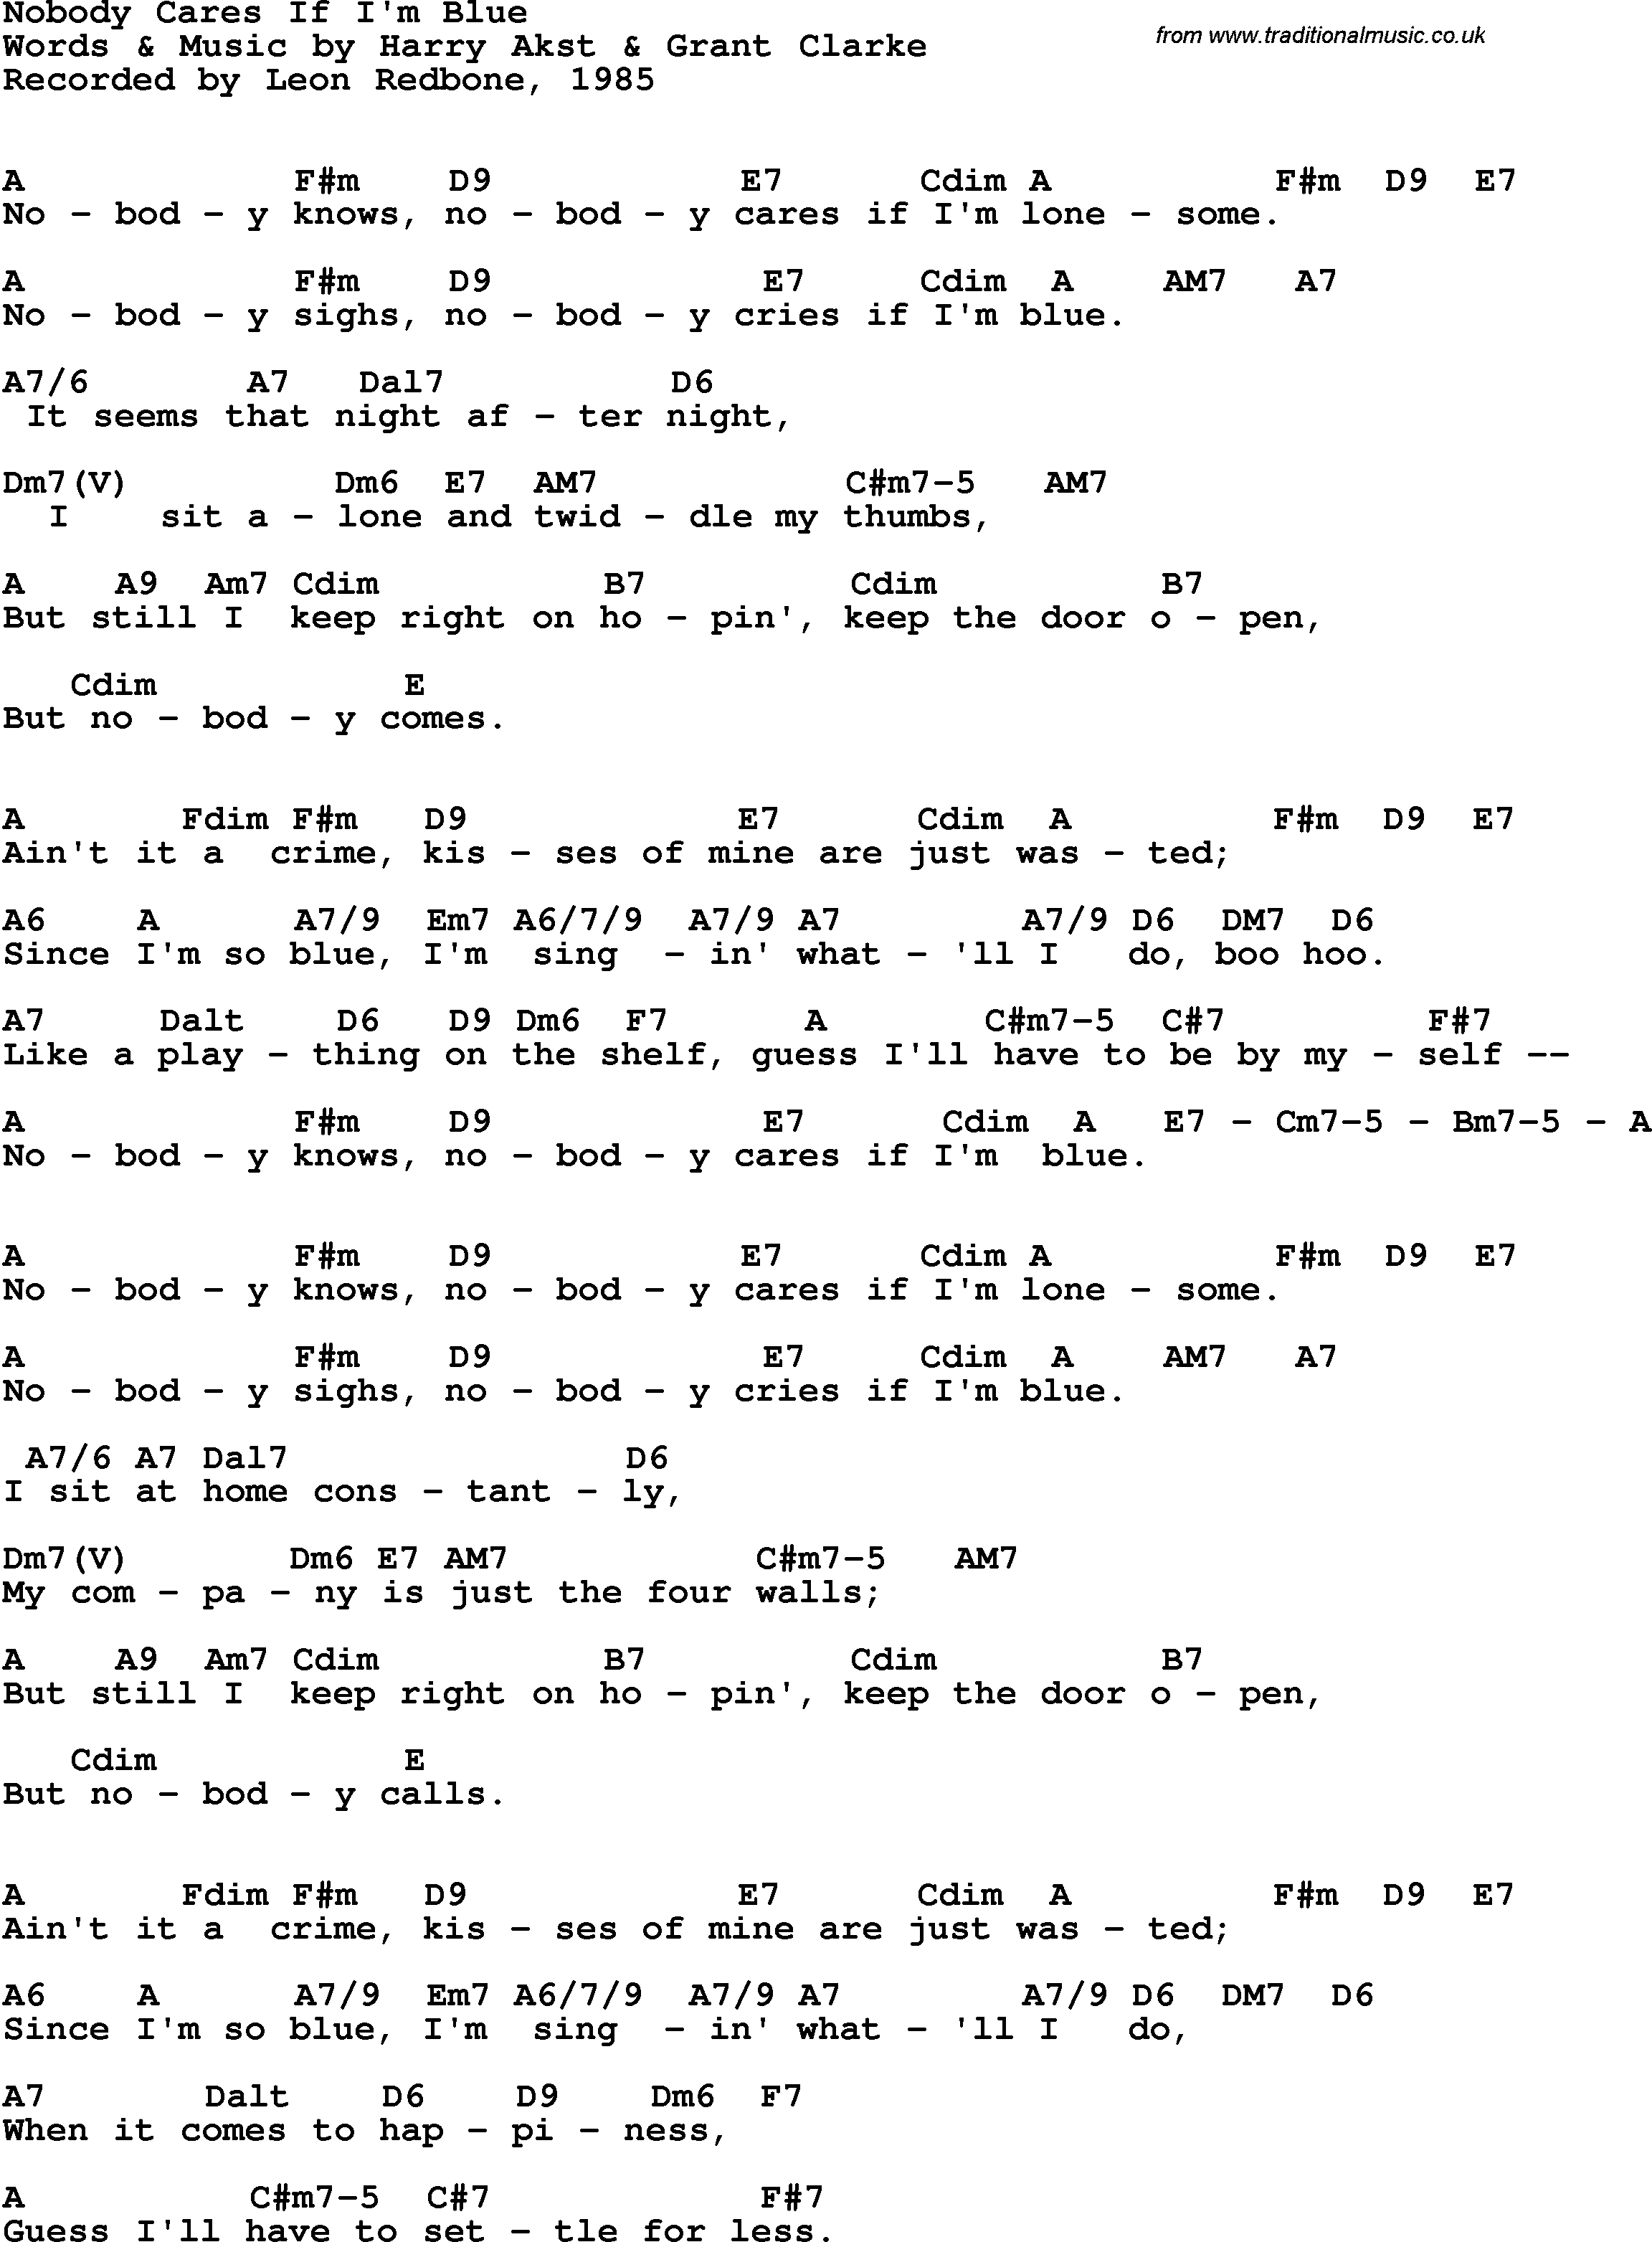 Song Lyrics with guitar chords for Nobody Cares If I'm Blue - Leon Redbone, 1985